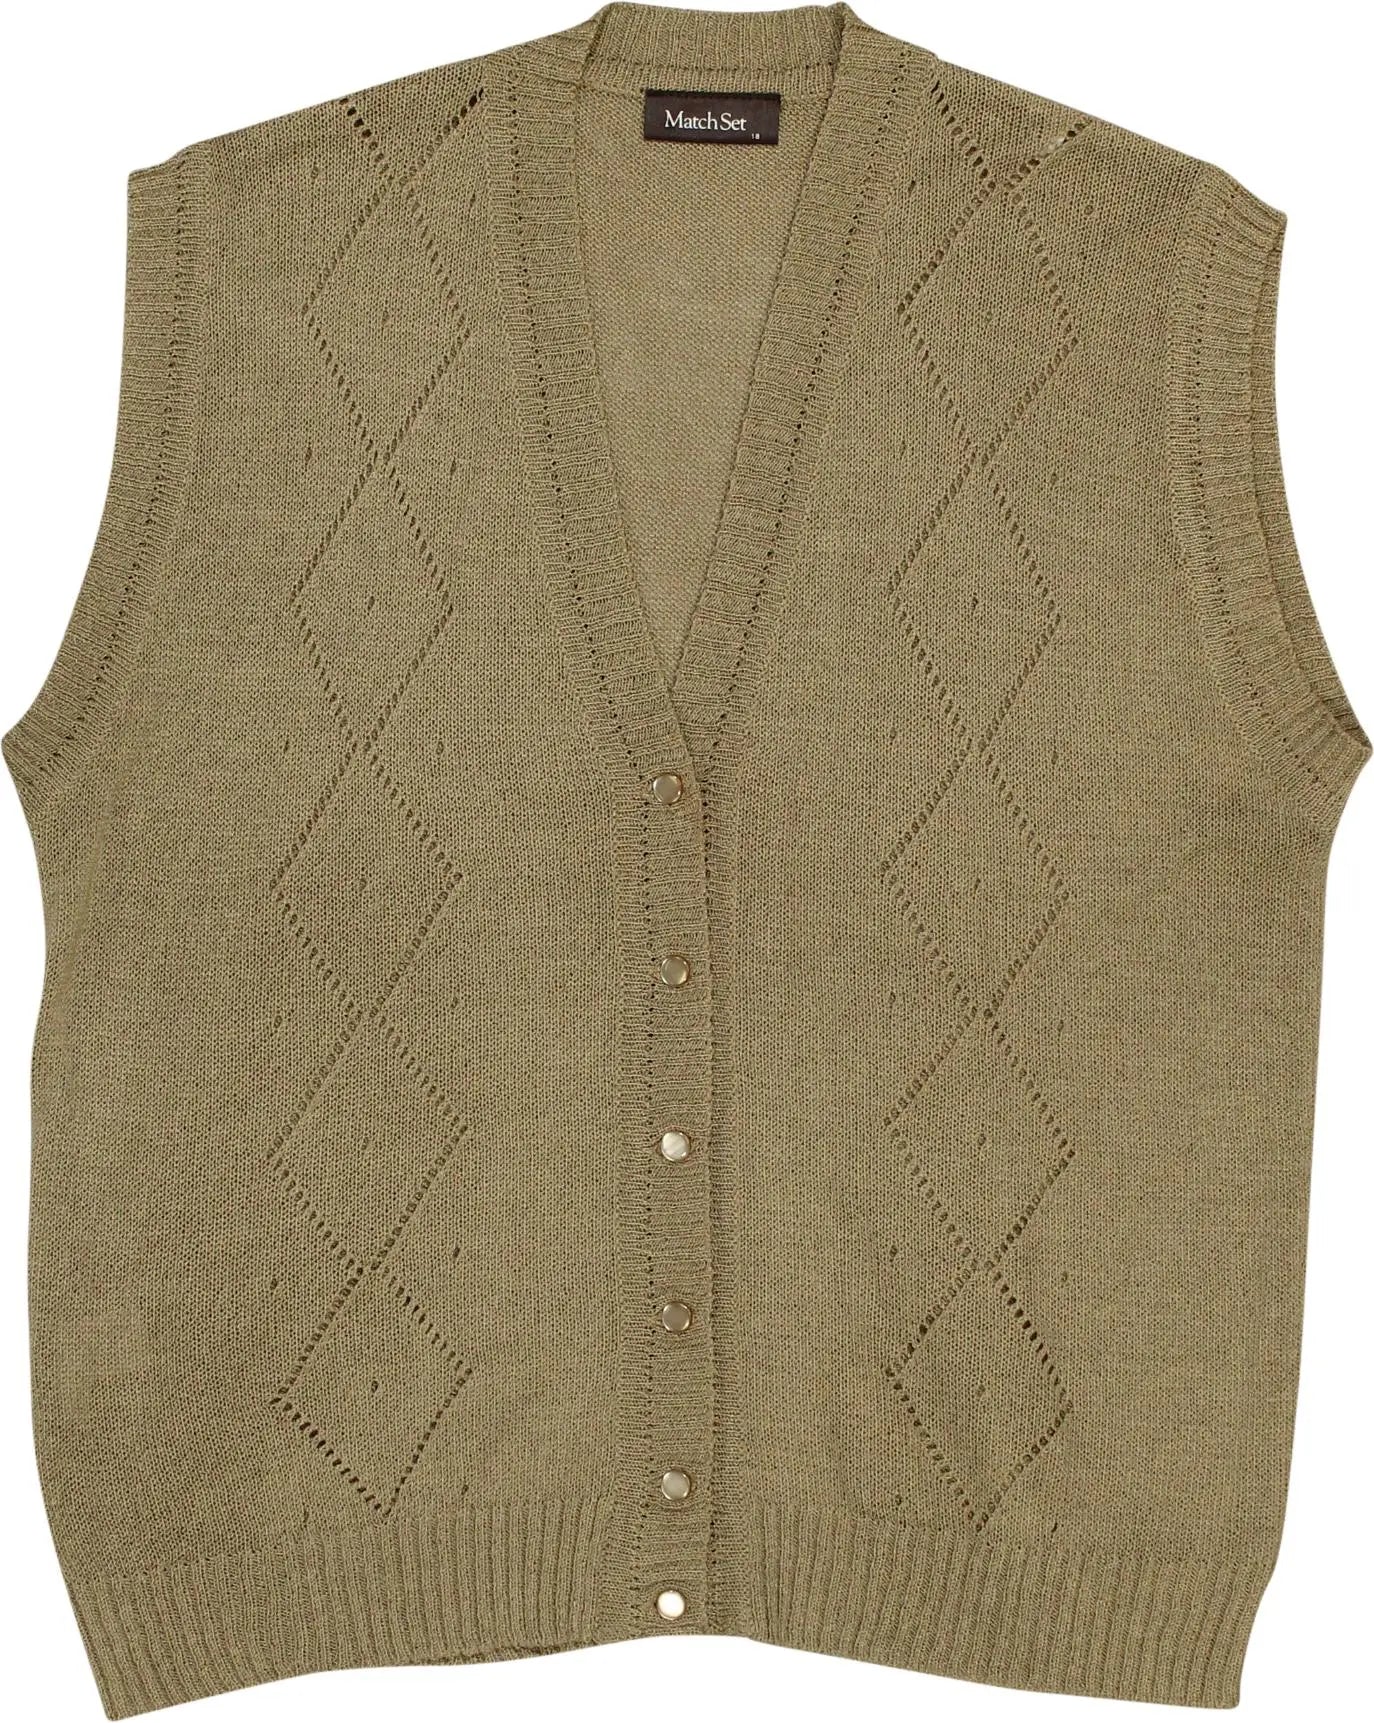 Match Set - Knitted Vest- ThriftTale.com - Vintage and second handclothing